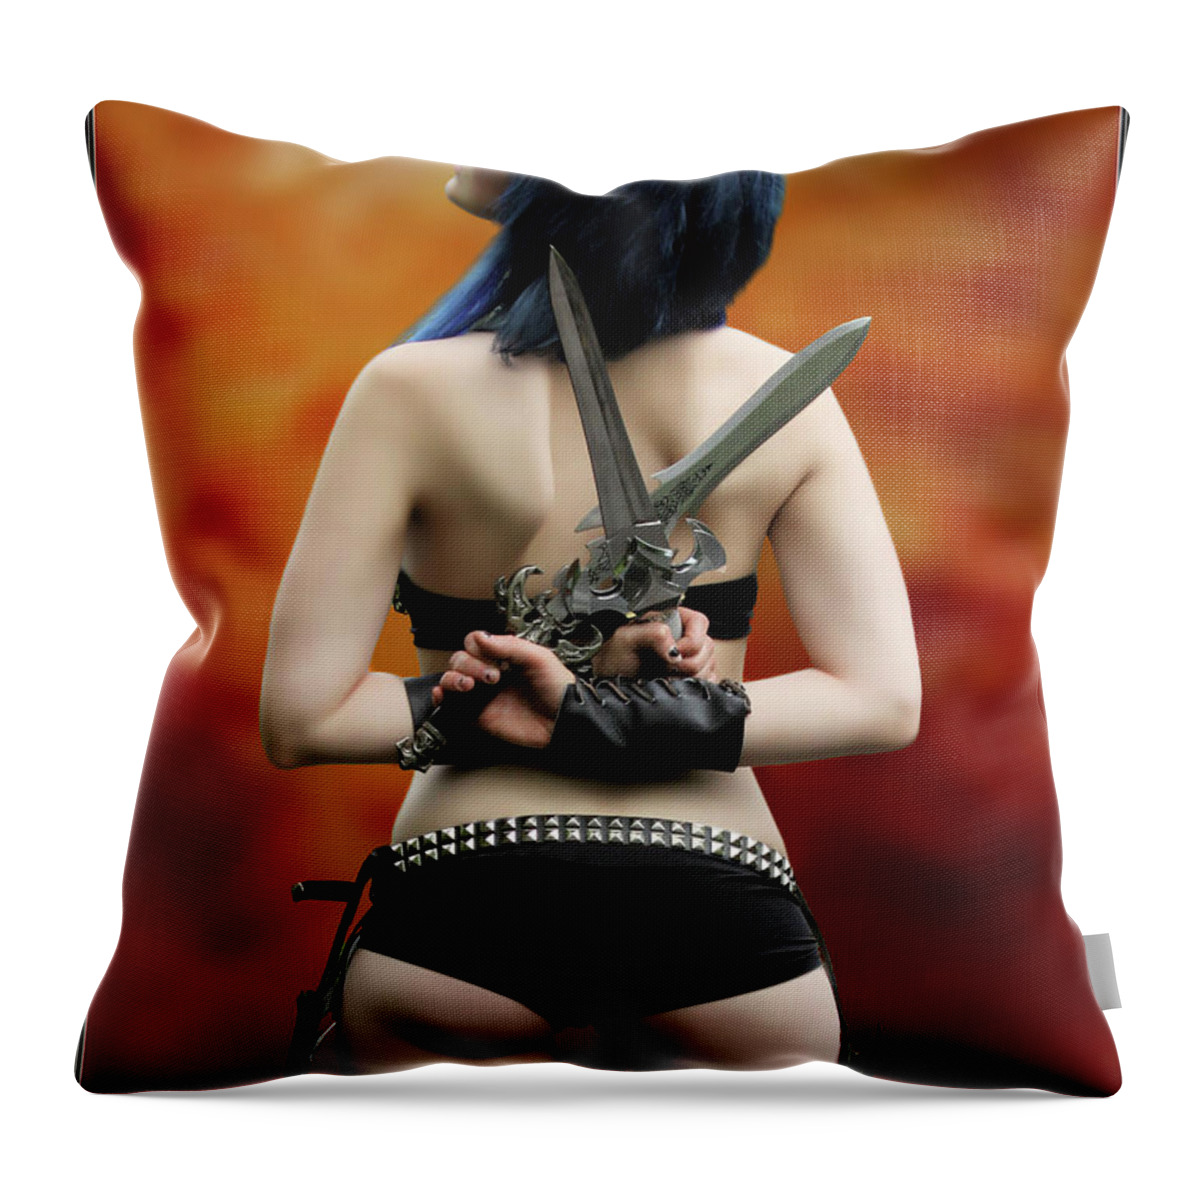 Girl Throw Pillow featuring the photograph A Girl And Her Knives by Jon Volden